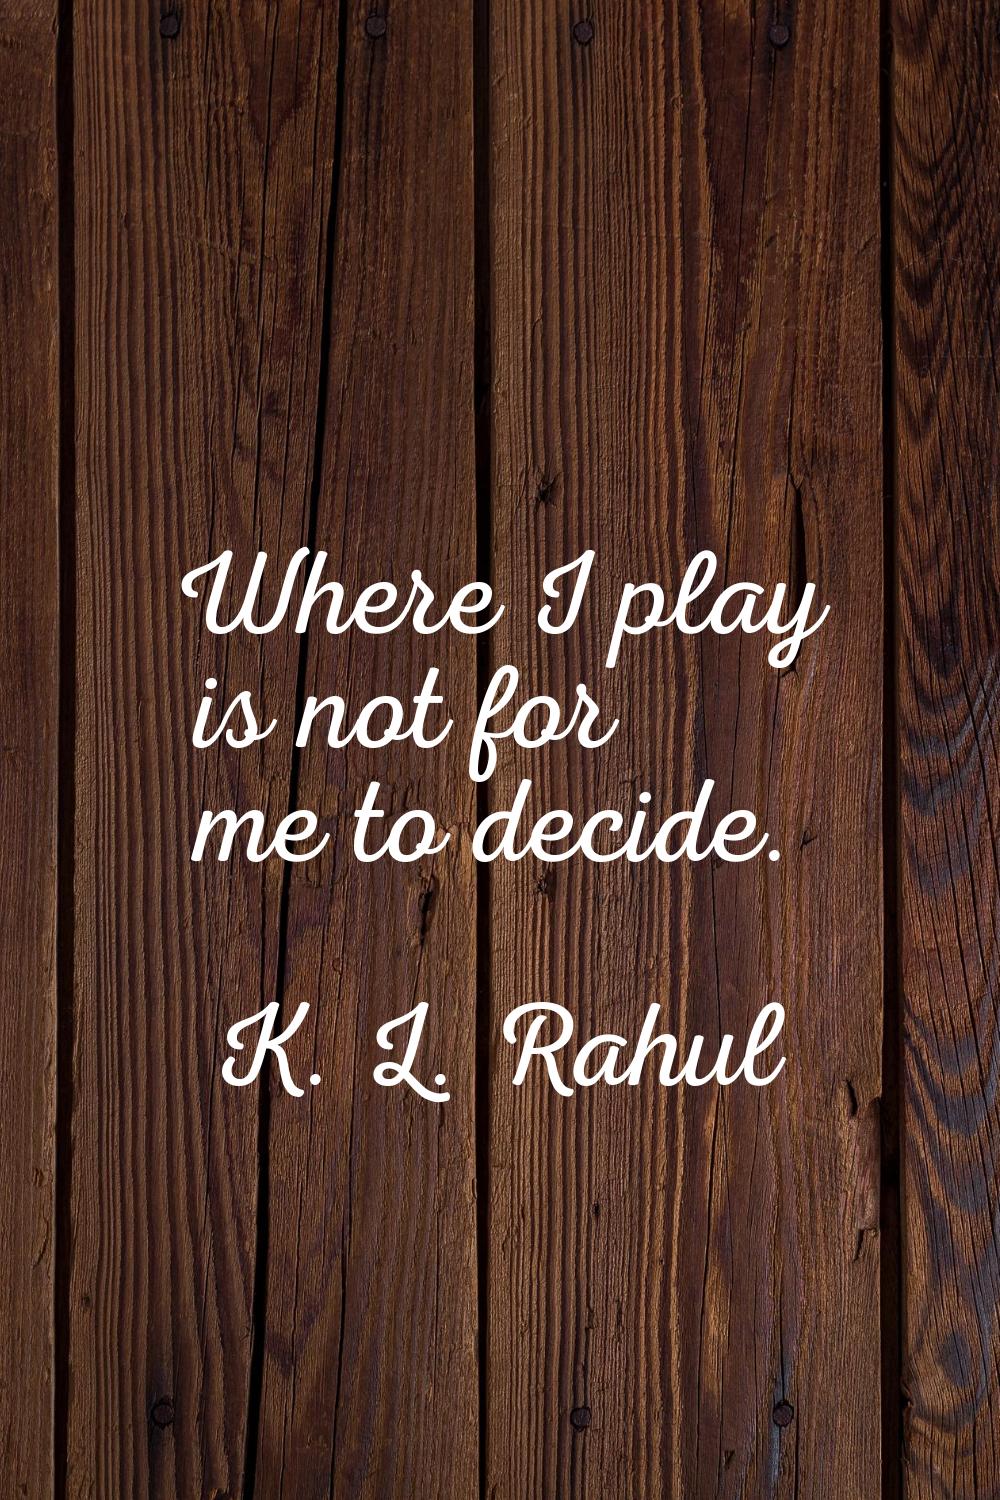 Where I play is not for me to decide.